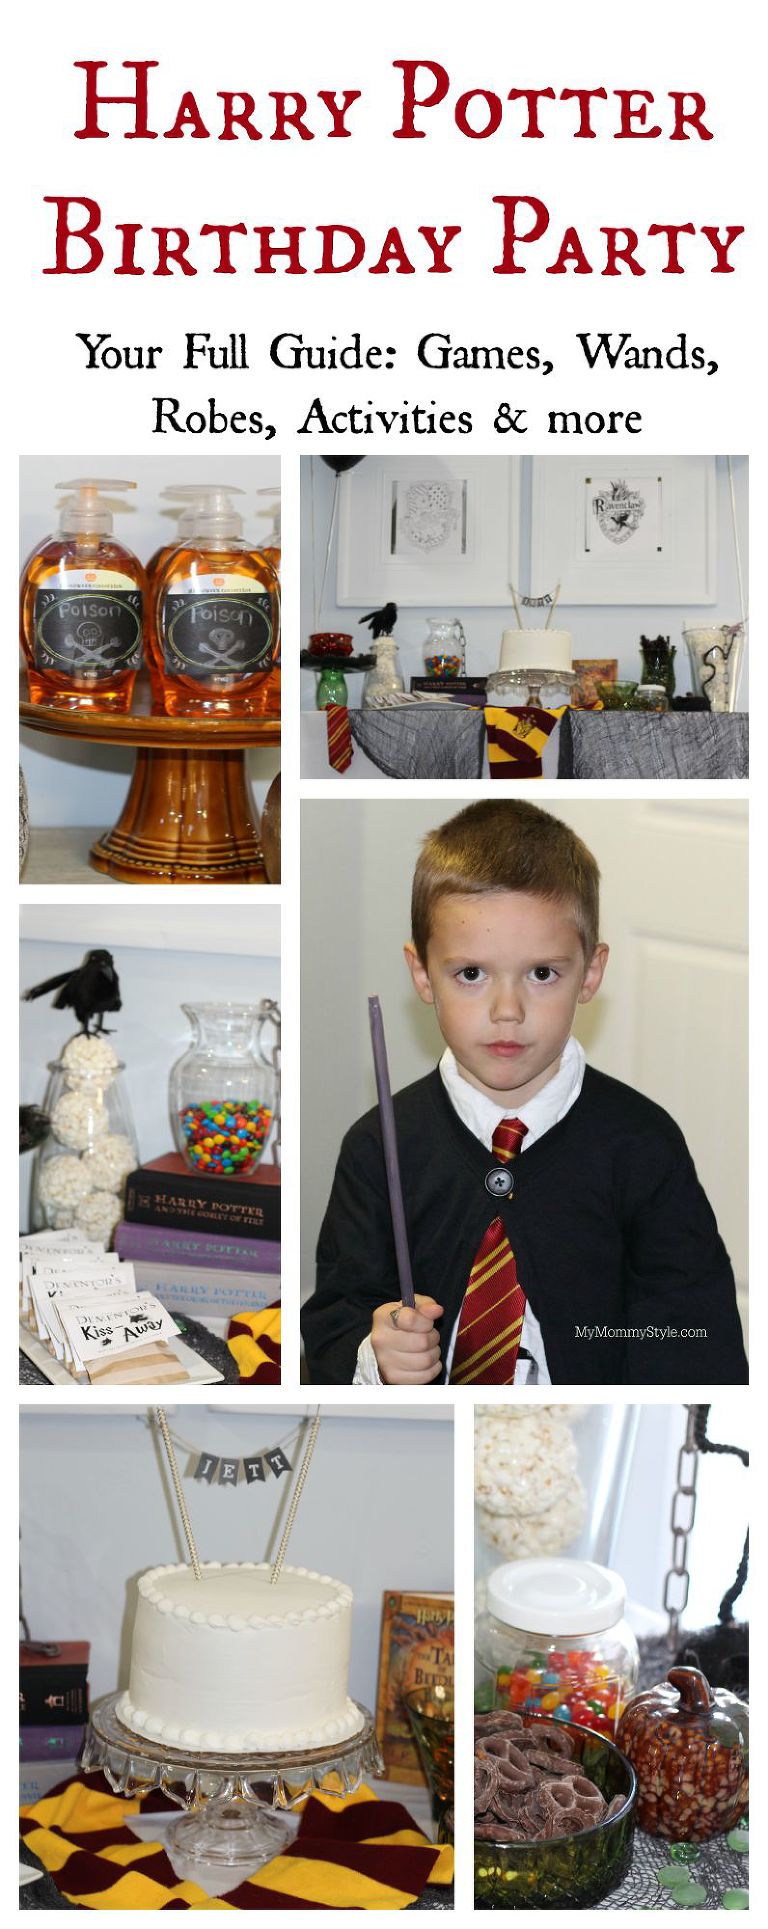 Harry Potter Birthday Party Decorations - Next Day Delivery